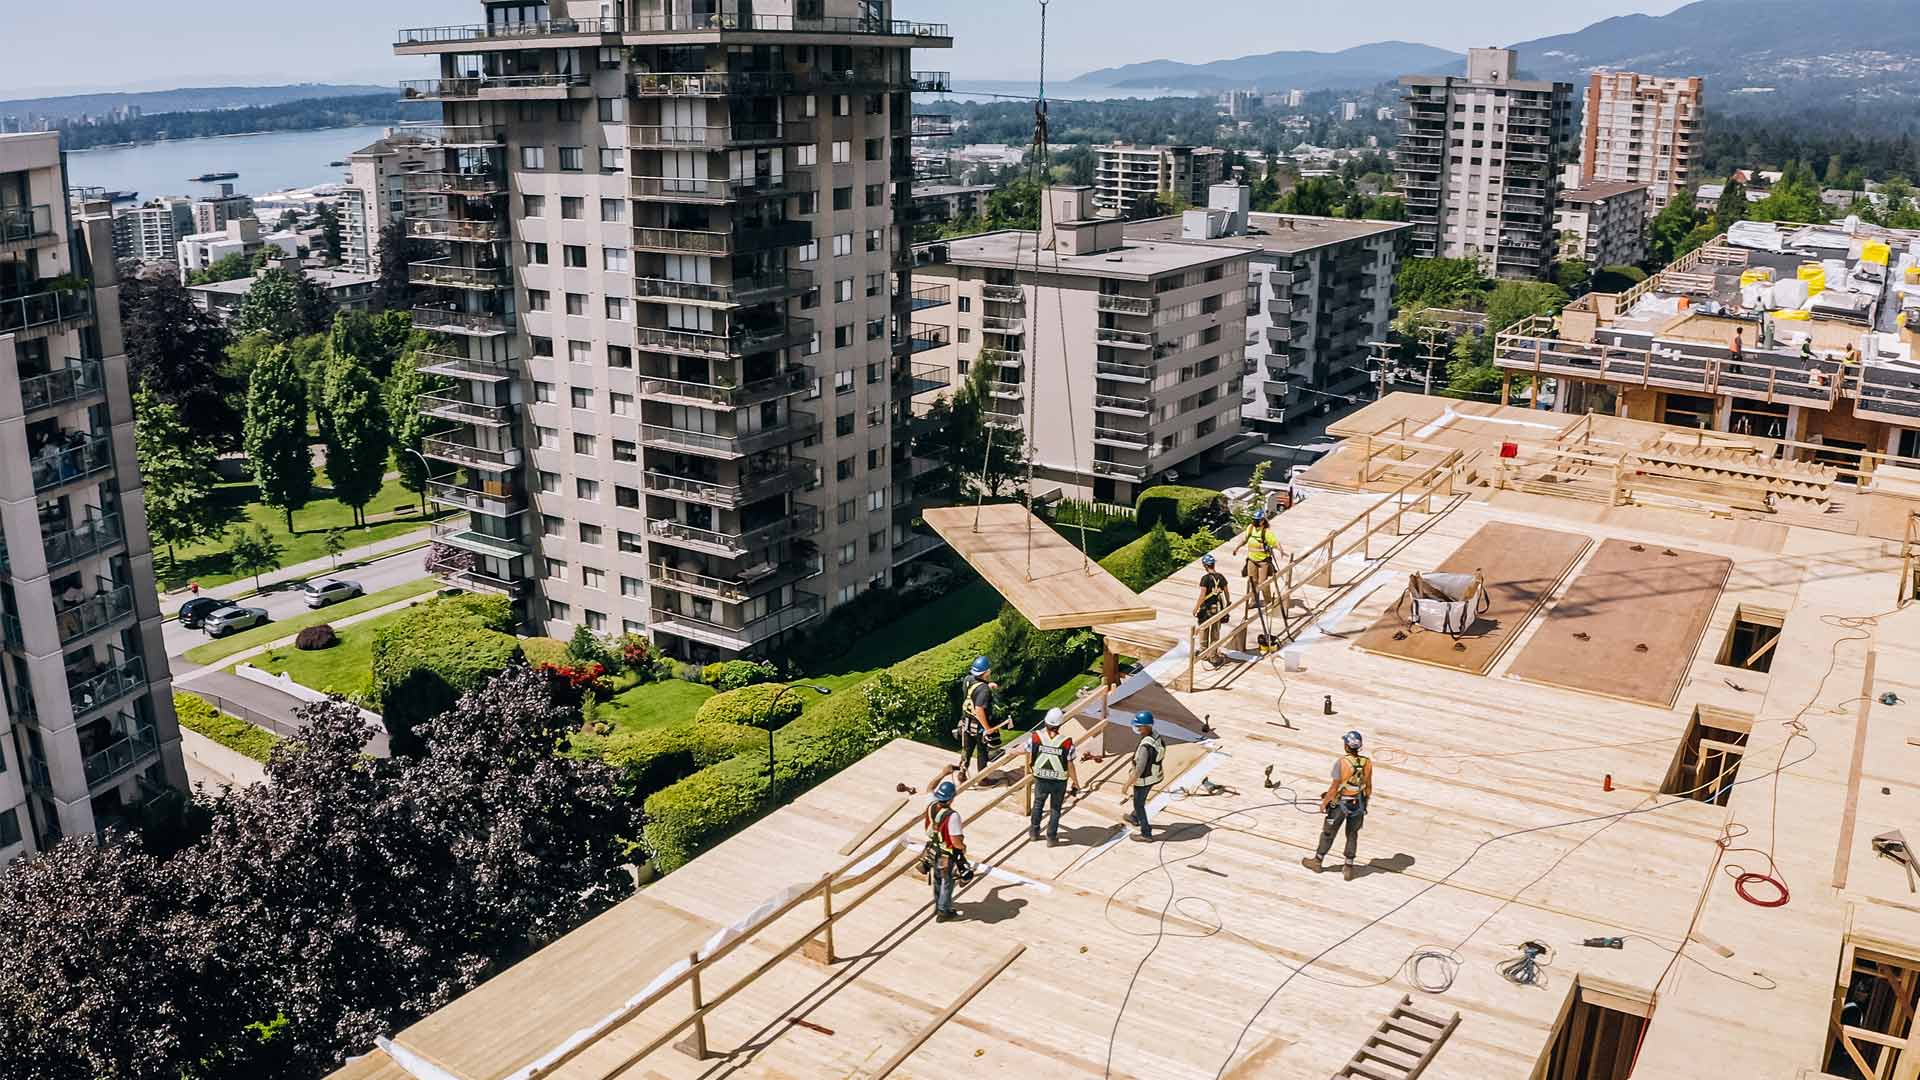 Construction workers finishing up a roof